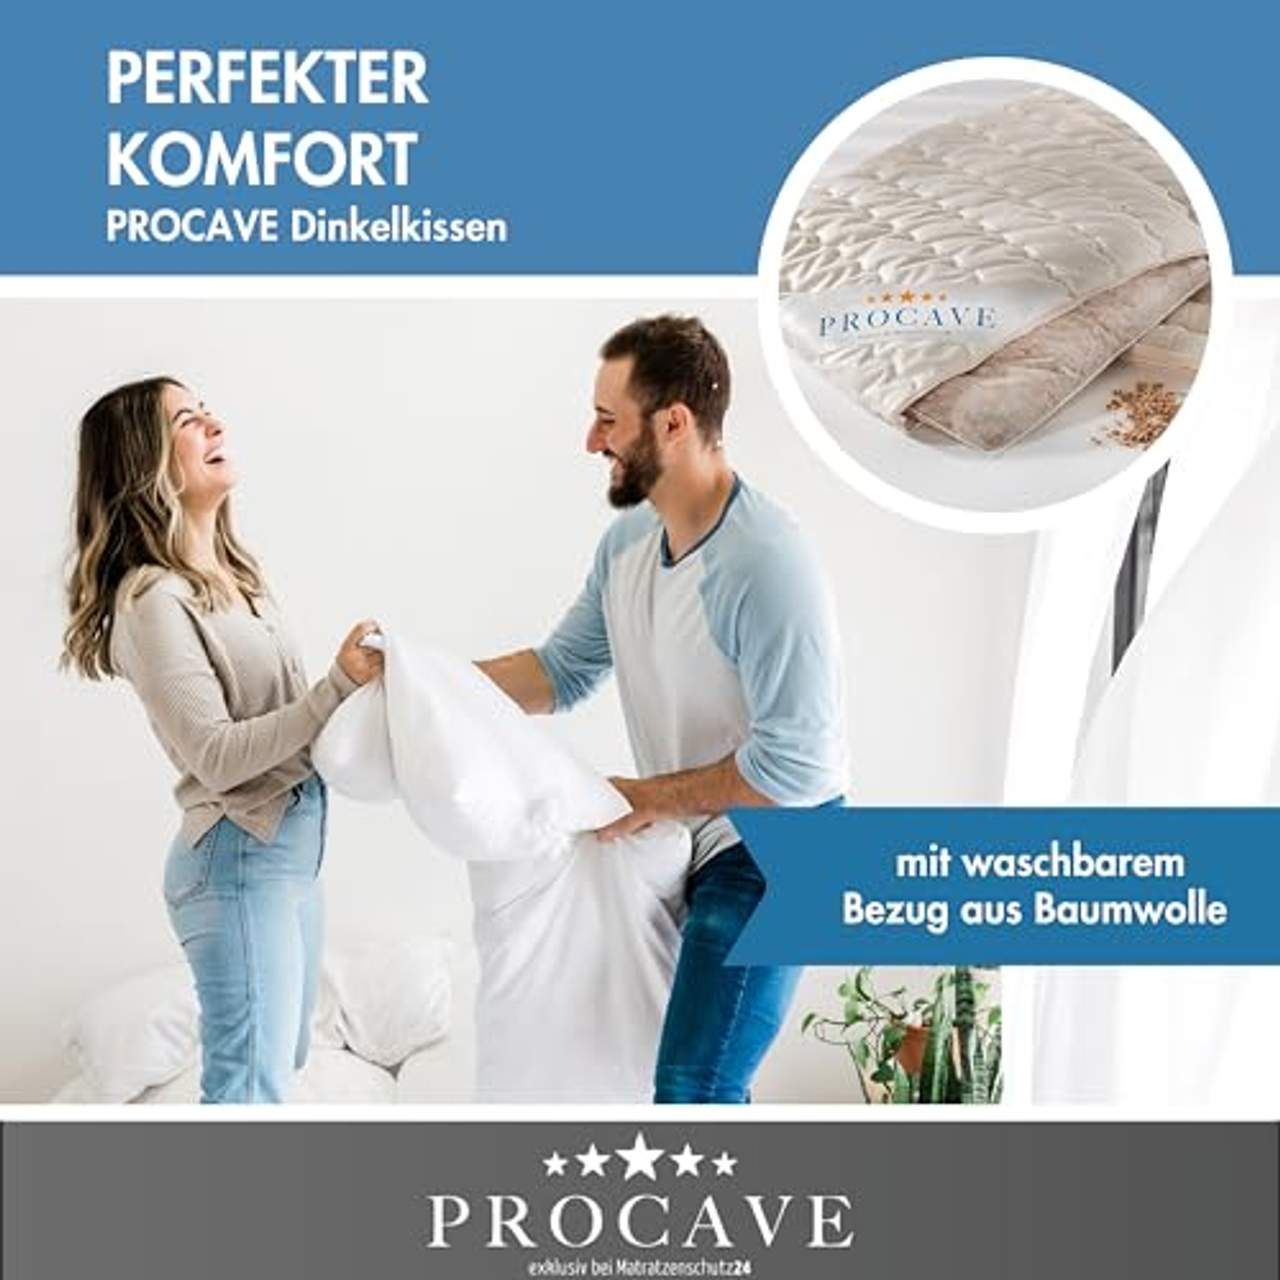 PROCAVE Dinkelkissen 40x80cm made in Germany